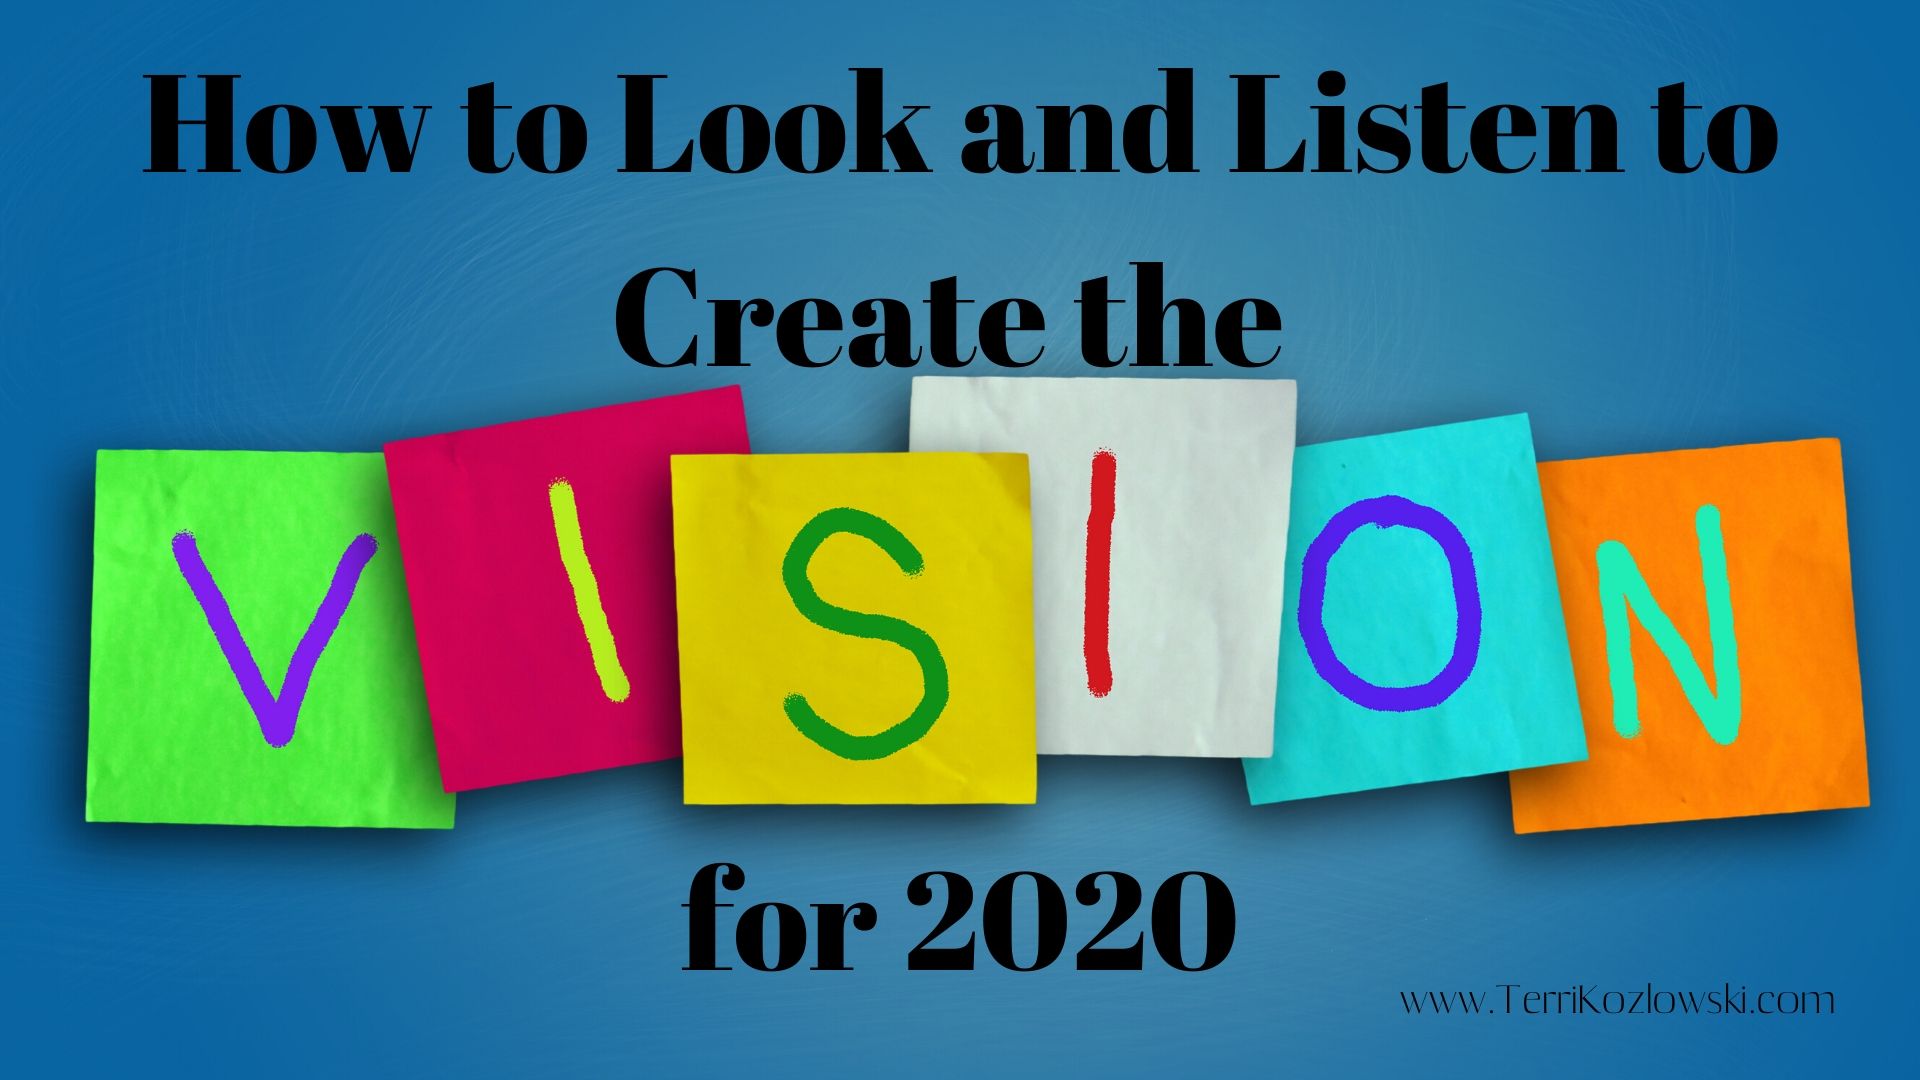 How to Look and Listen to Create the Vision for 2020